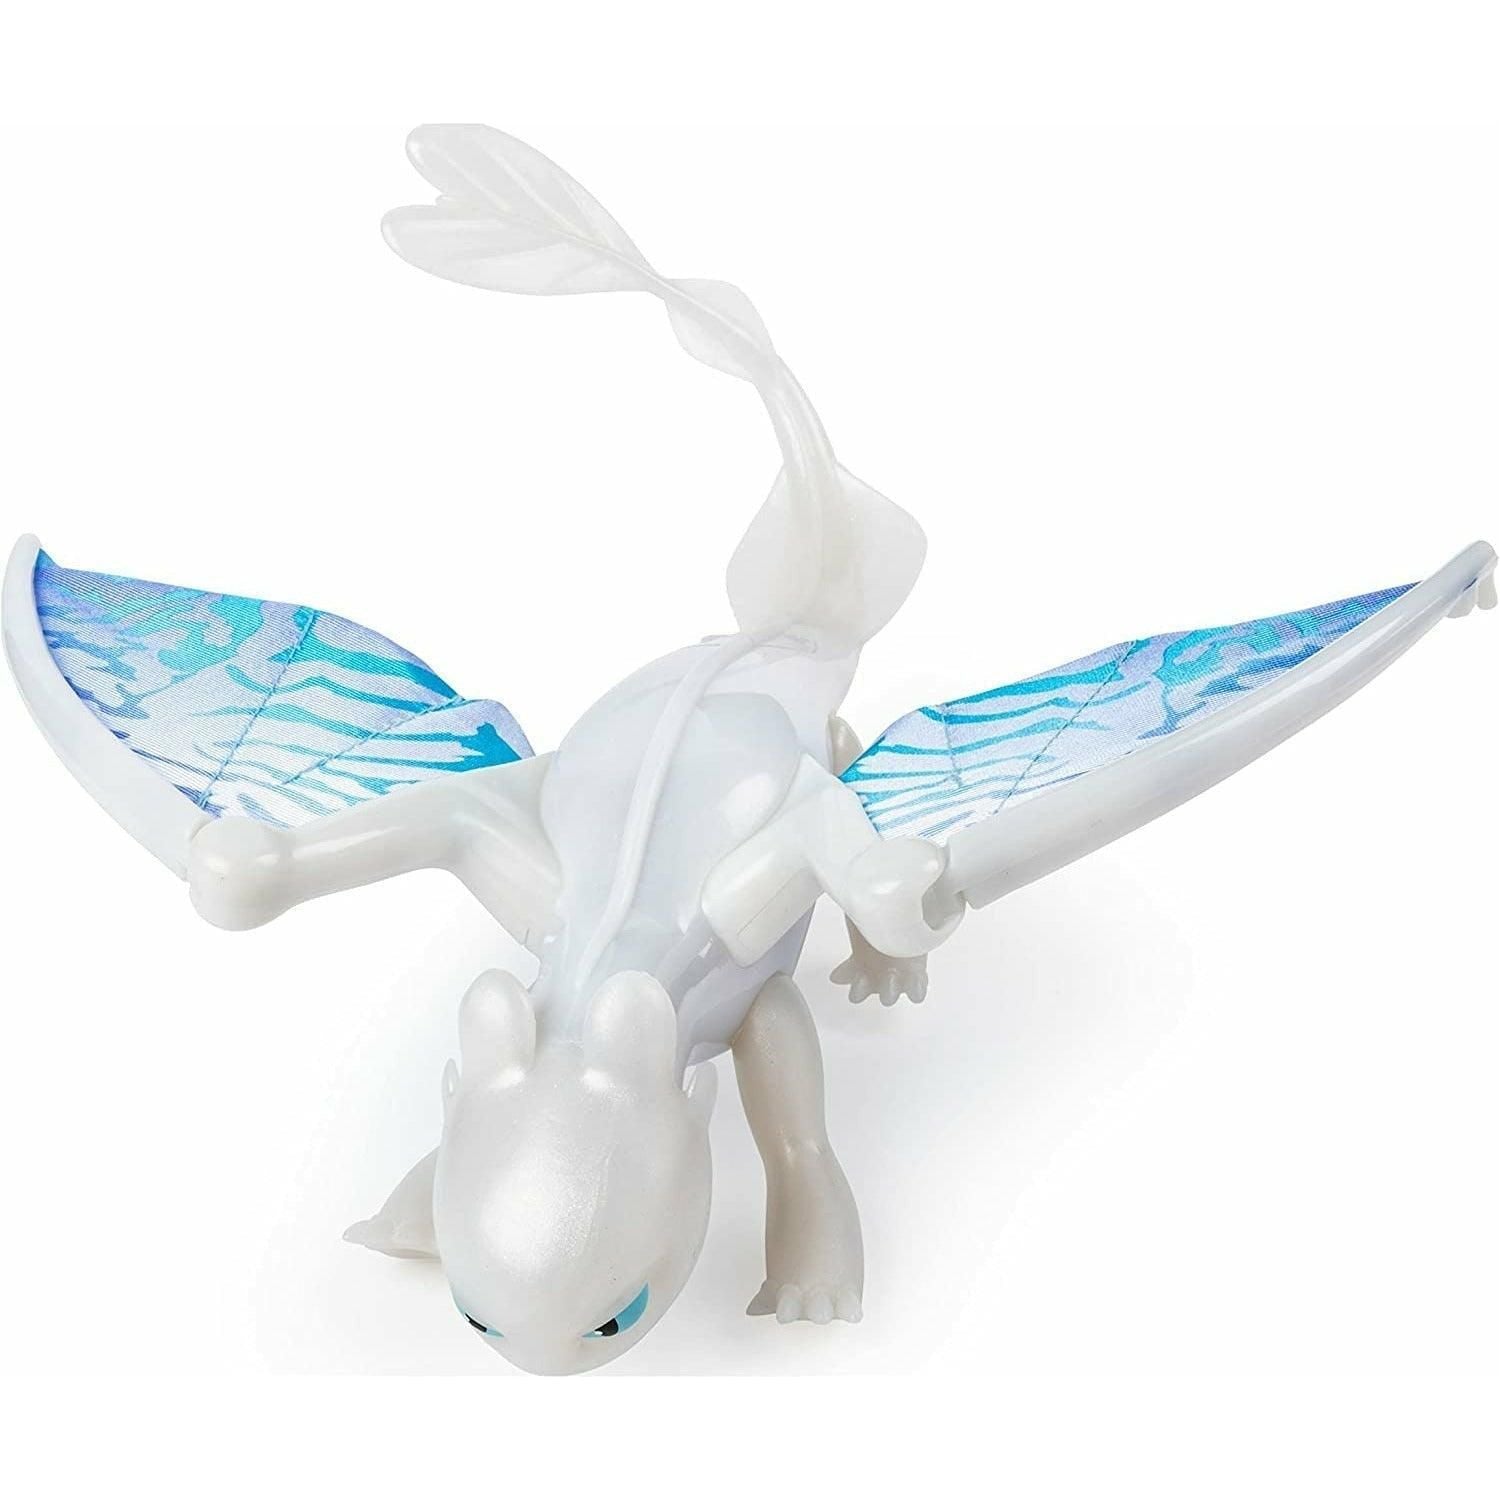 Dreamworks Dragons Lightfury Deluxe Dragon With Lights and Sounds - BumbleToys - 5-7 Years, Action Figures, Boys, OXE